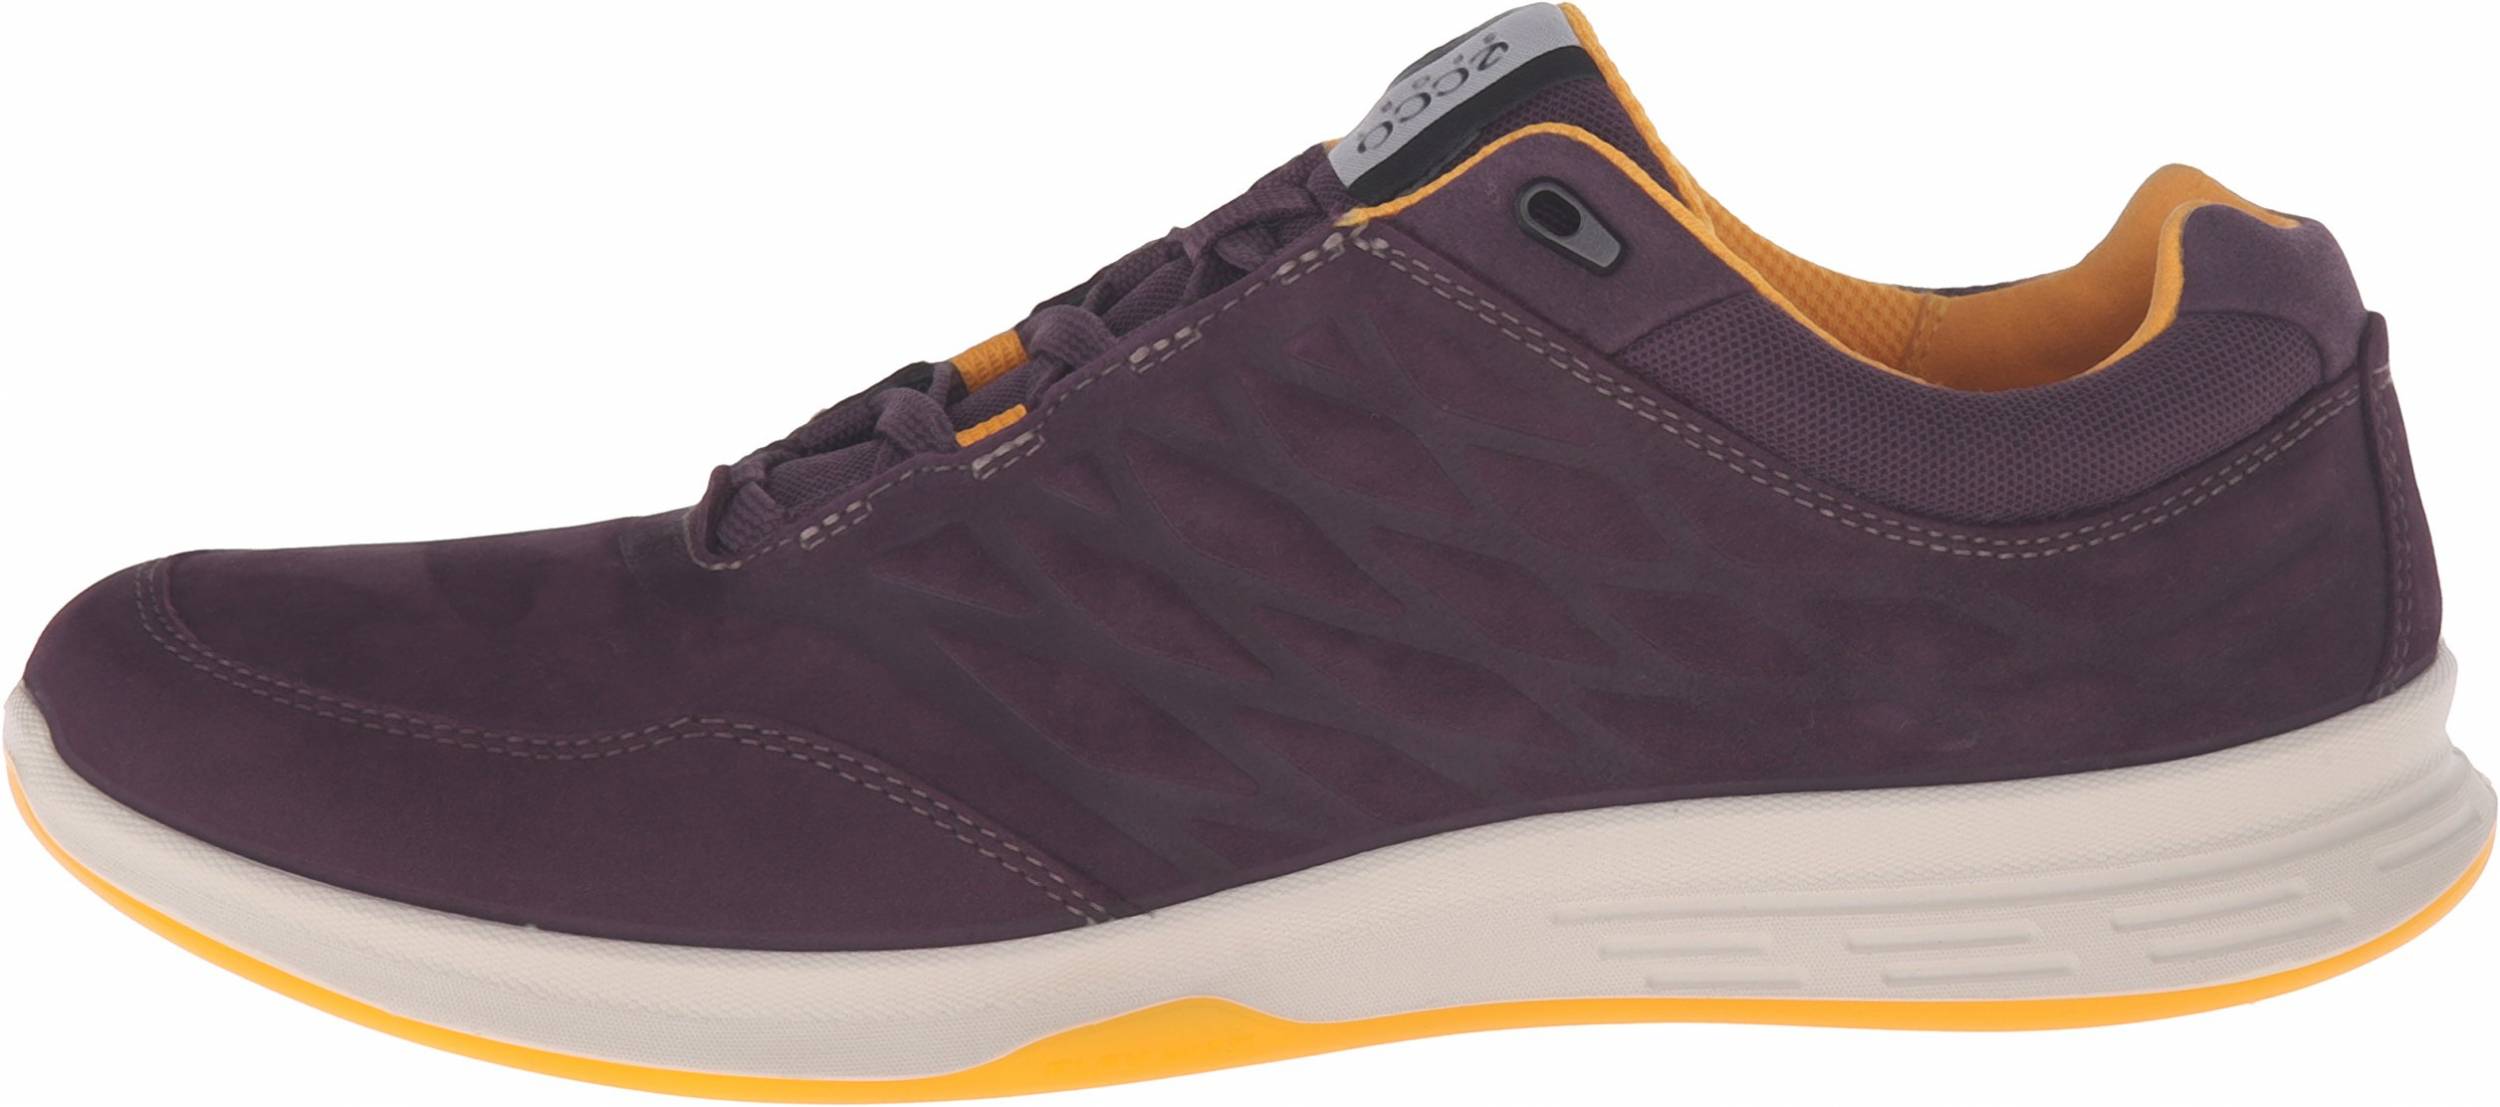 Only £84 + Review of Ecco Exceed Low 